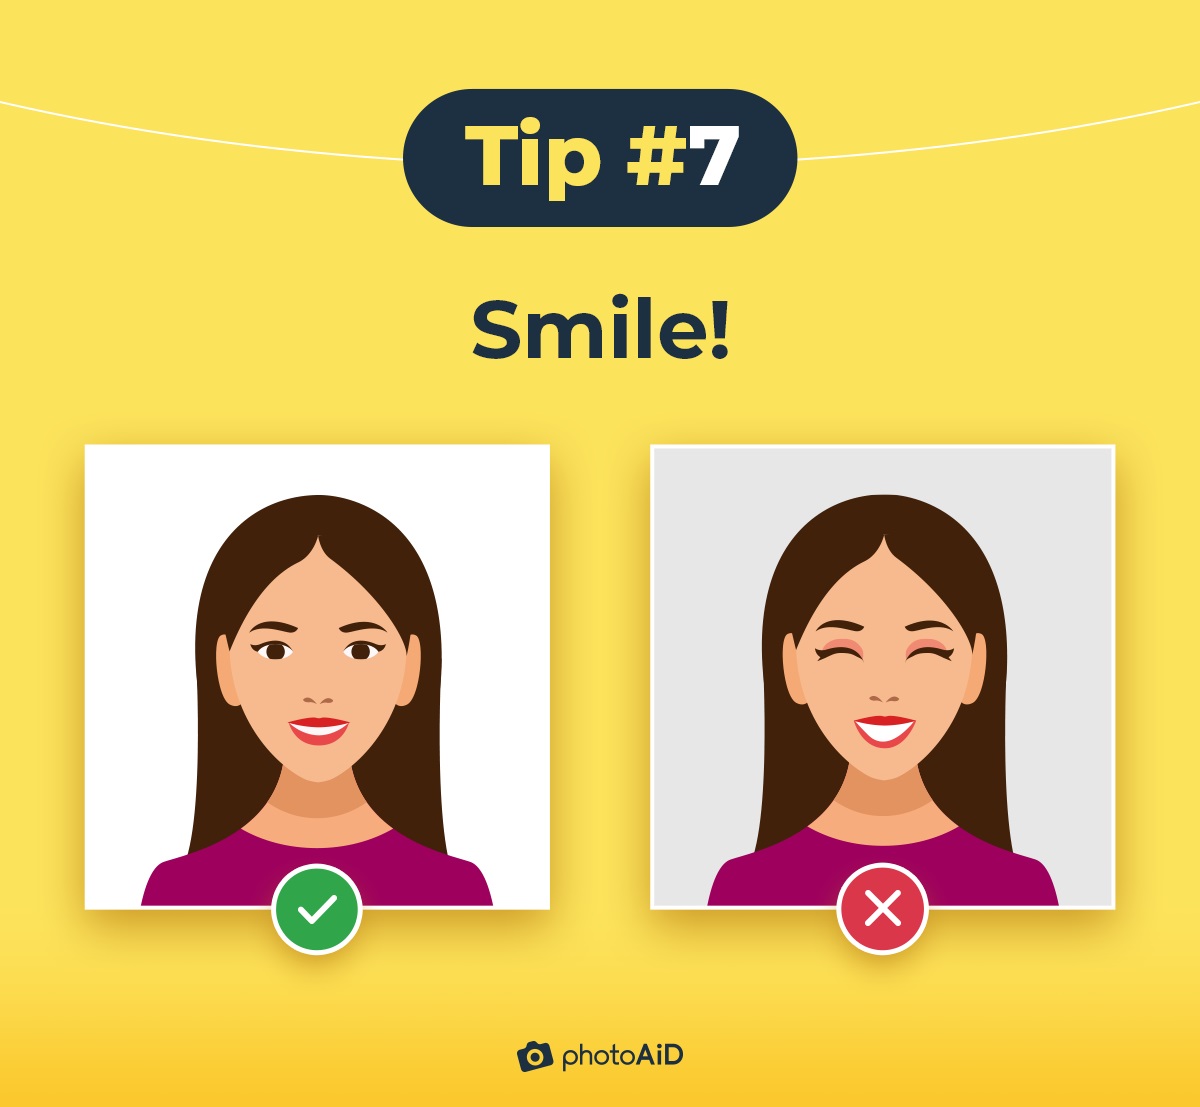 A tip showing the importance of a natural smile in the LinkedIn profile photo.